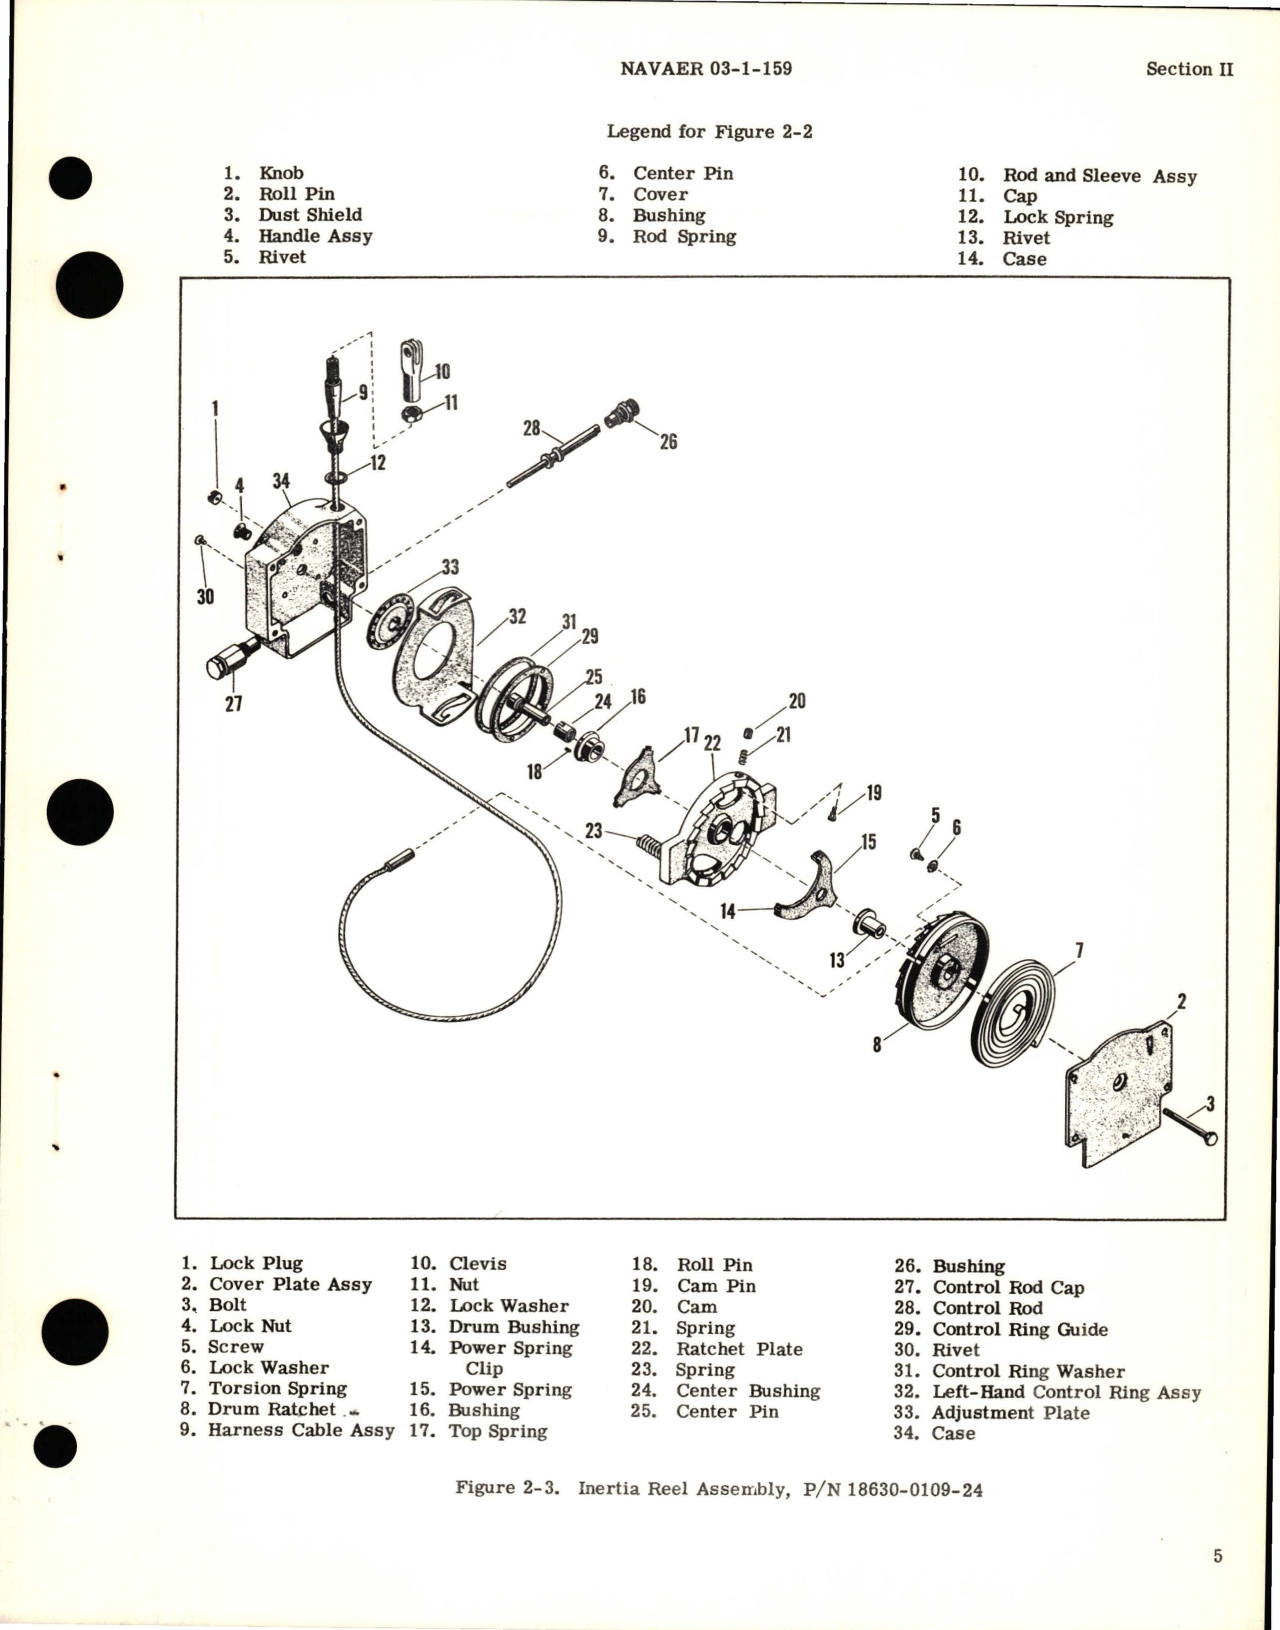 Sample page 7 from AirCorps Library document: Overhaul Instructions for Uni-Directional Inertia Reel Assembly - Model 11